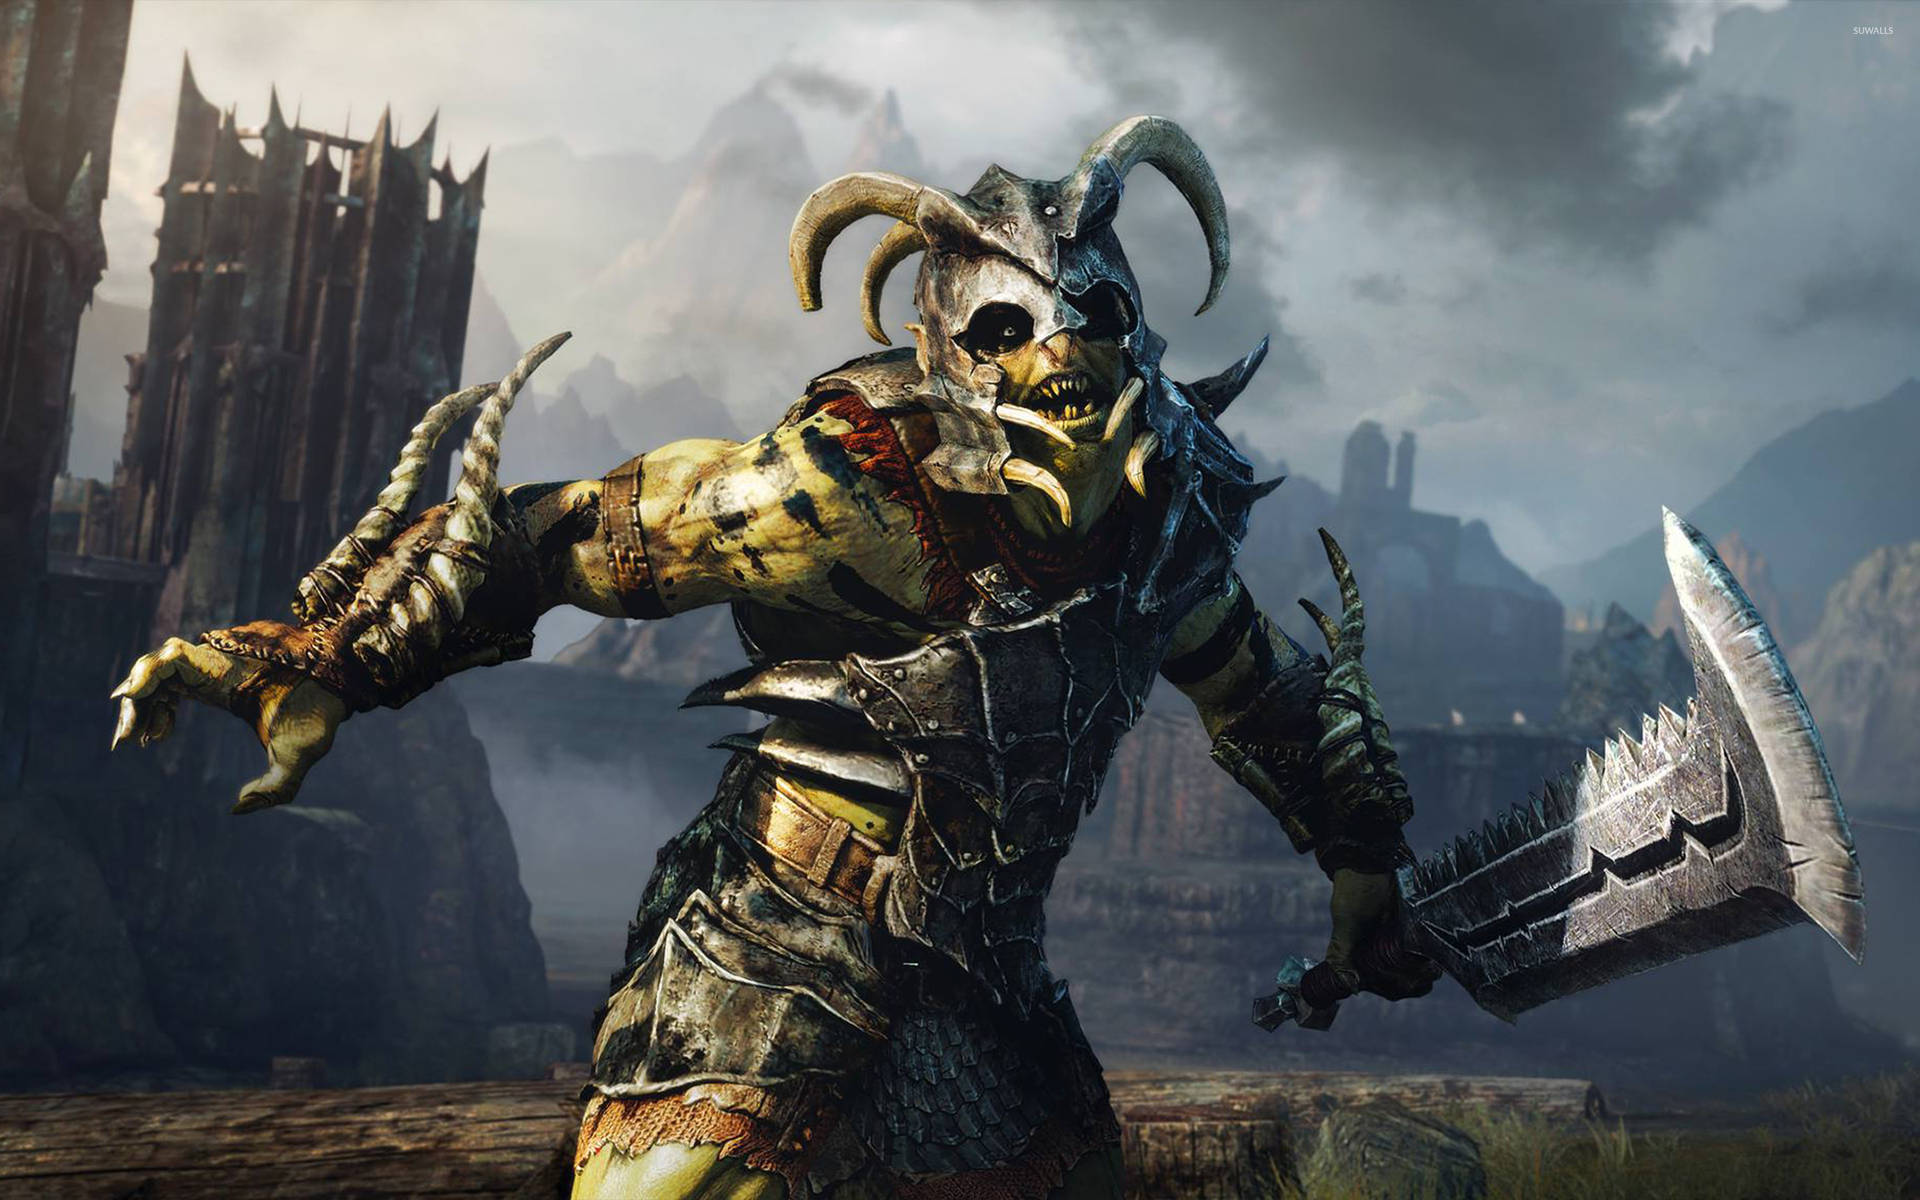 Join Talion in the epic crusade through Mordor Wallpaper